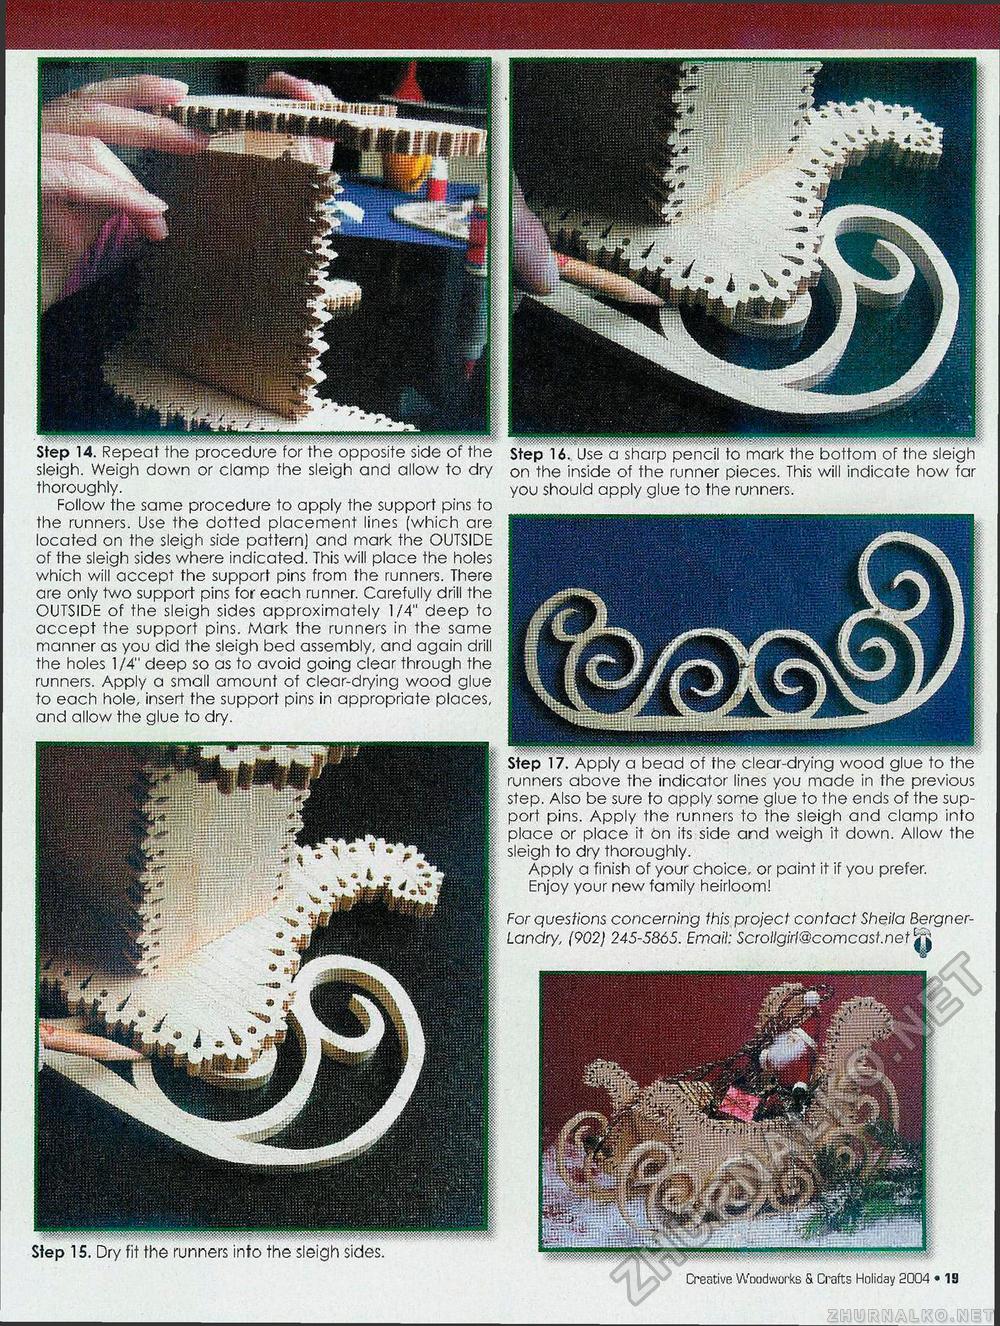 Creative Woodworks  & crafts-103-2004-Holiday,  19